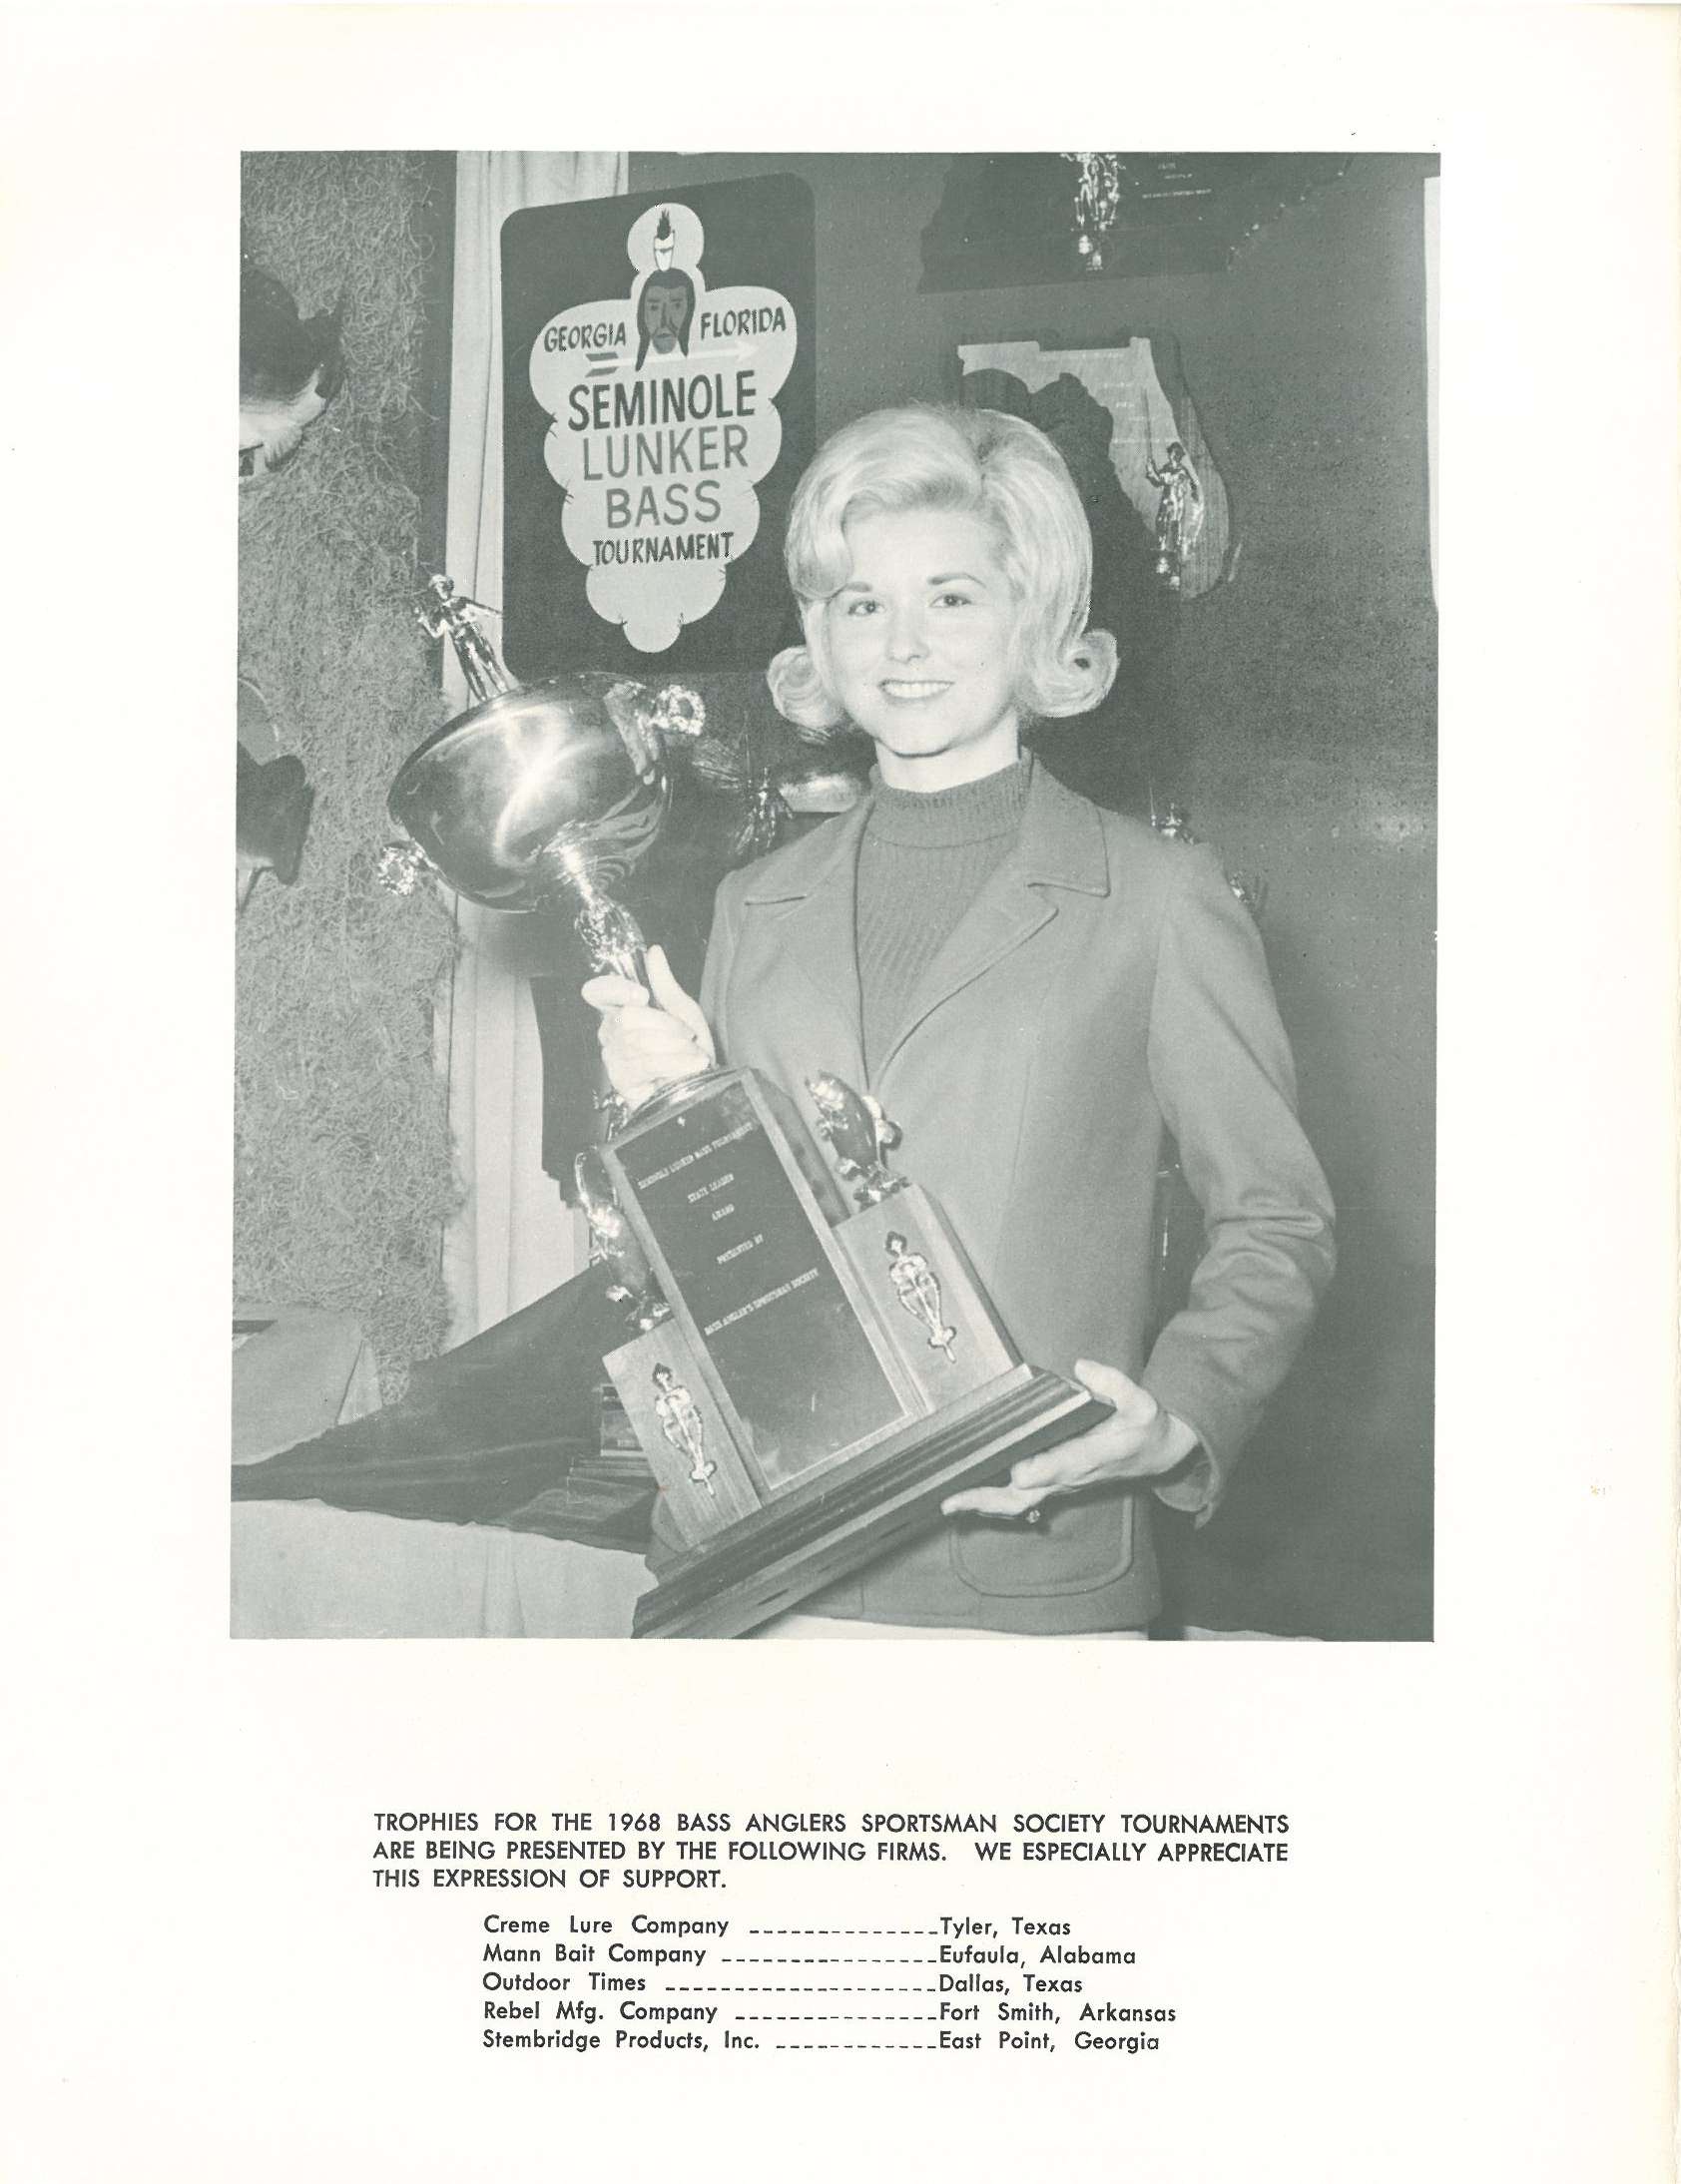 Inside the front cover, B.A.S.S. thanks the companies that presented trophies for the 1968 schedule of tournaments.